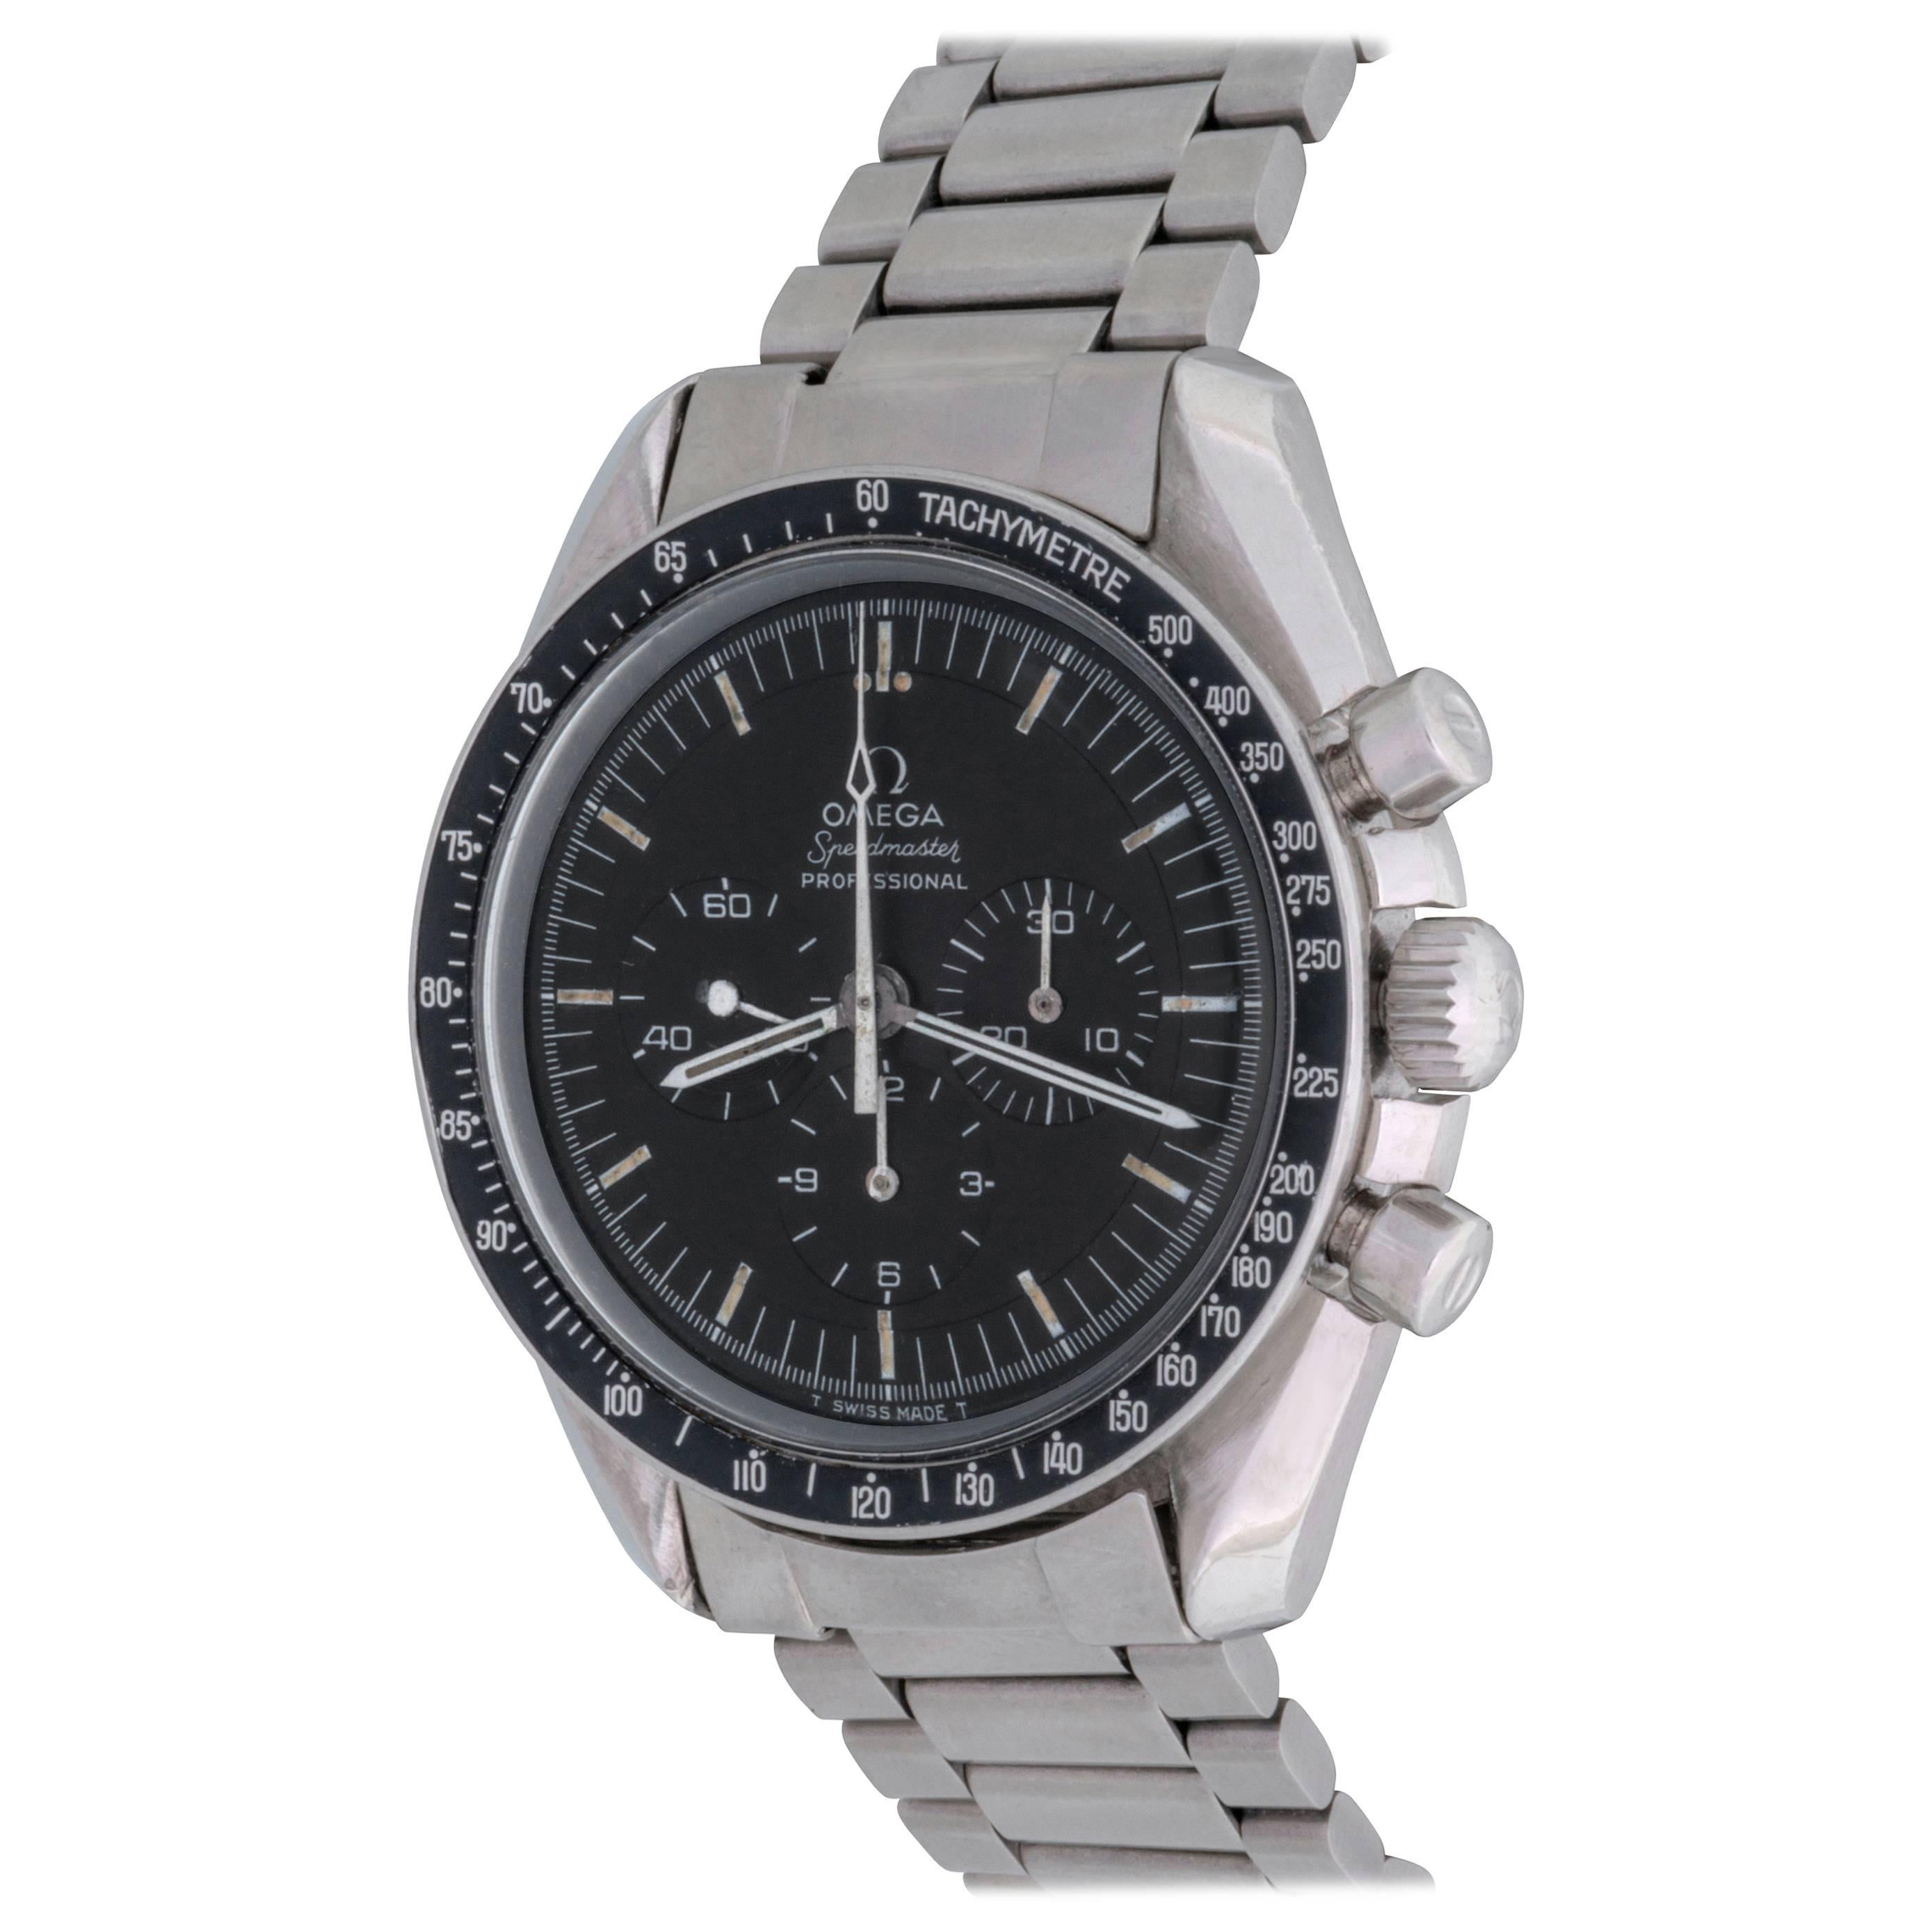 Omega Stainless Steel Speedmaster Professional Chronograph Manual Wristwatch For Sale